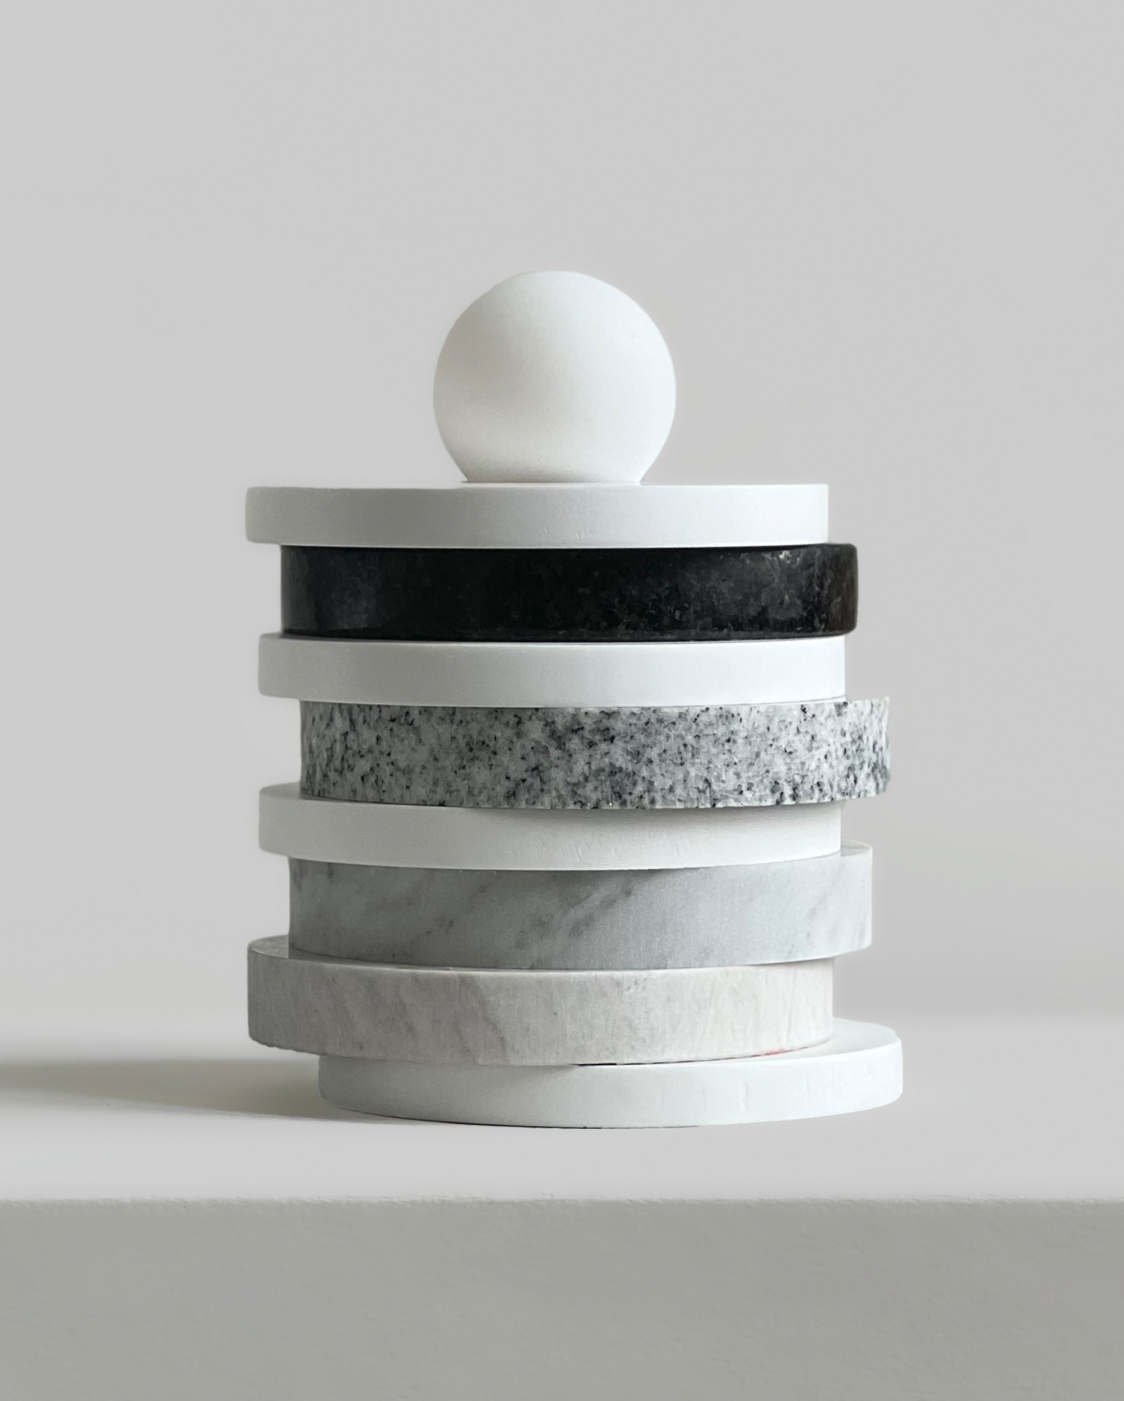 The design for Offcuts, Reimagined is modular. Stone rings are stacked in different ways to create sculptural effects.